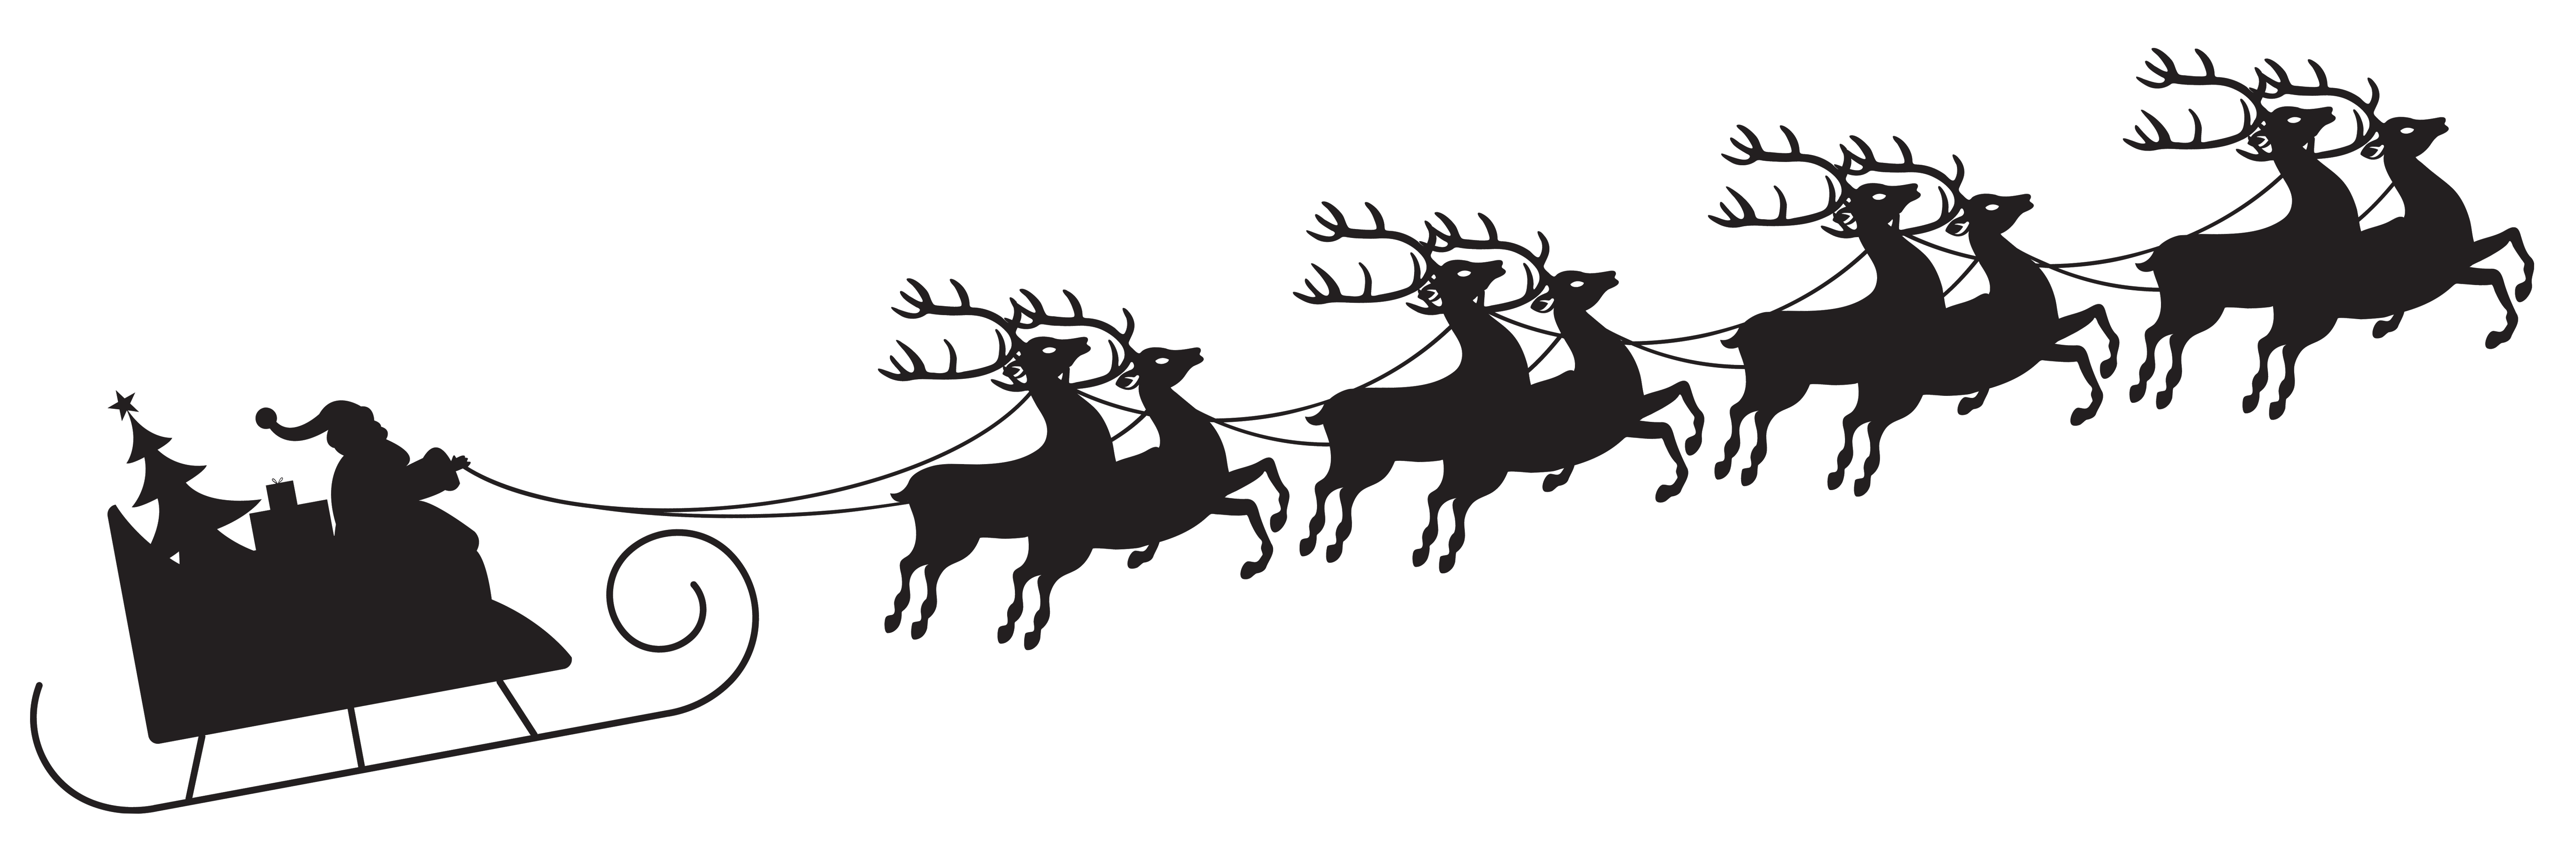 Sleigh clipart black and white. Silhouette of horse drawn